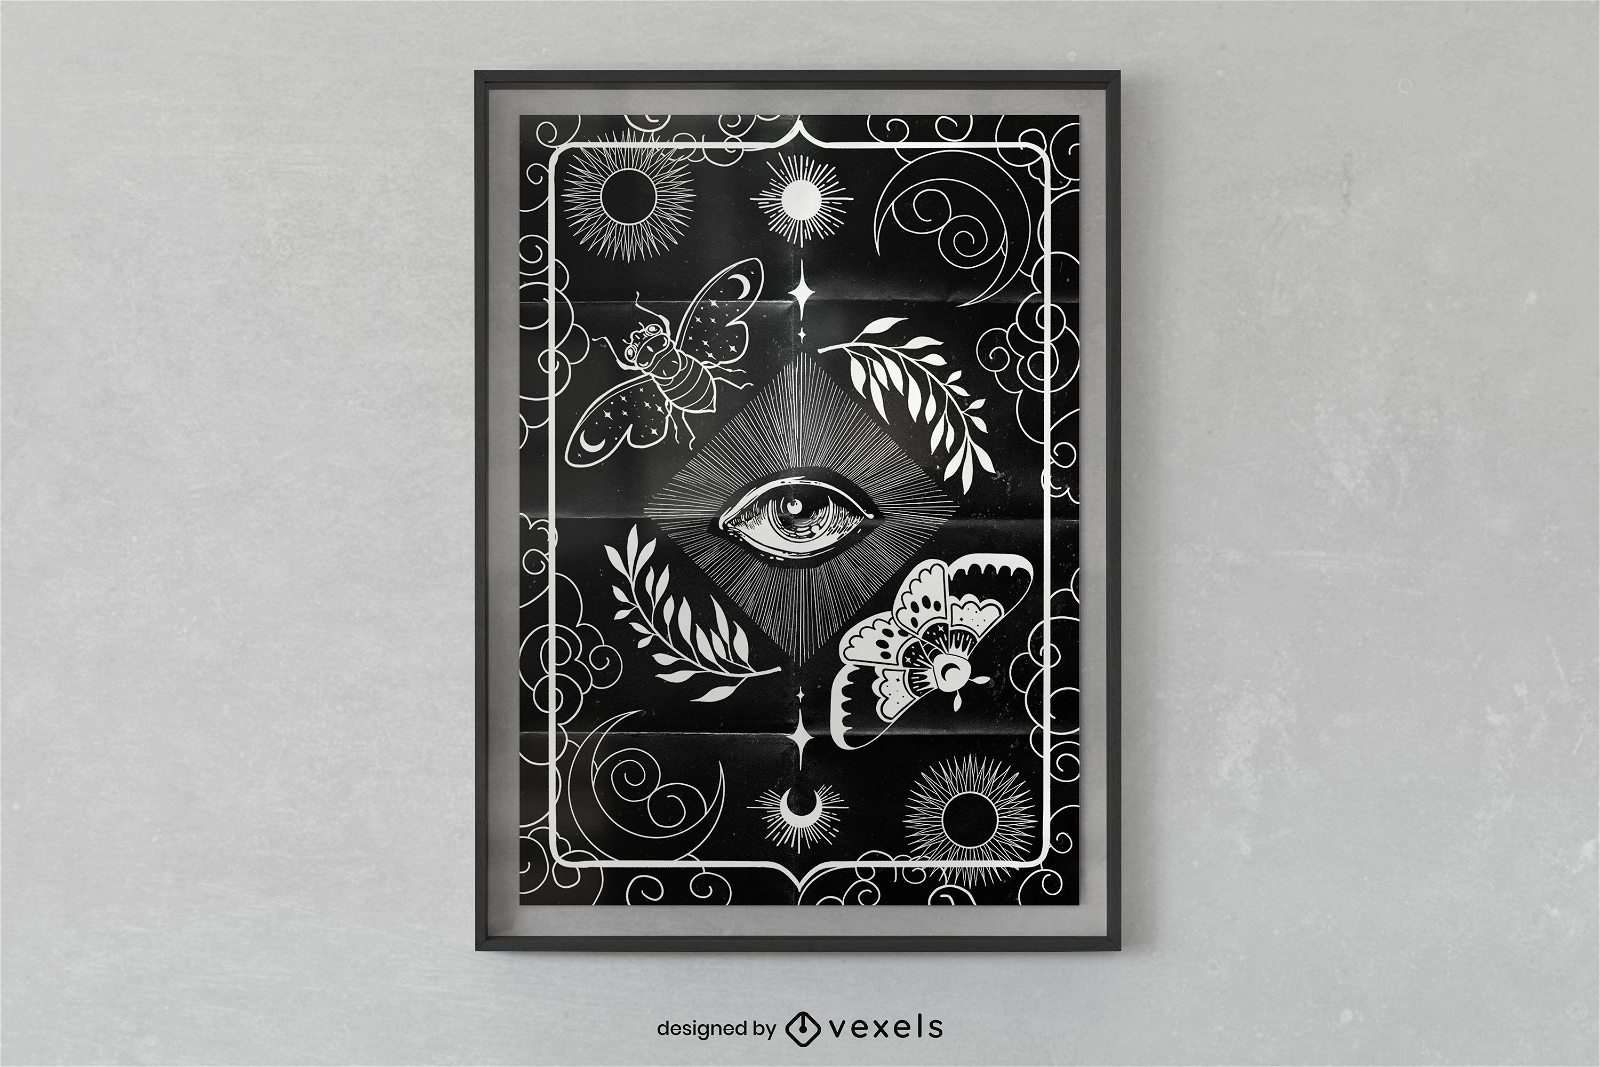 Witchy third eye poster design